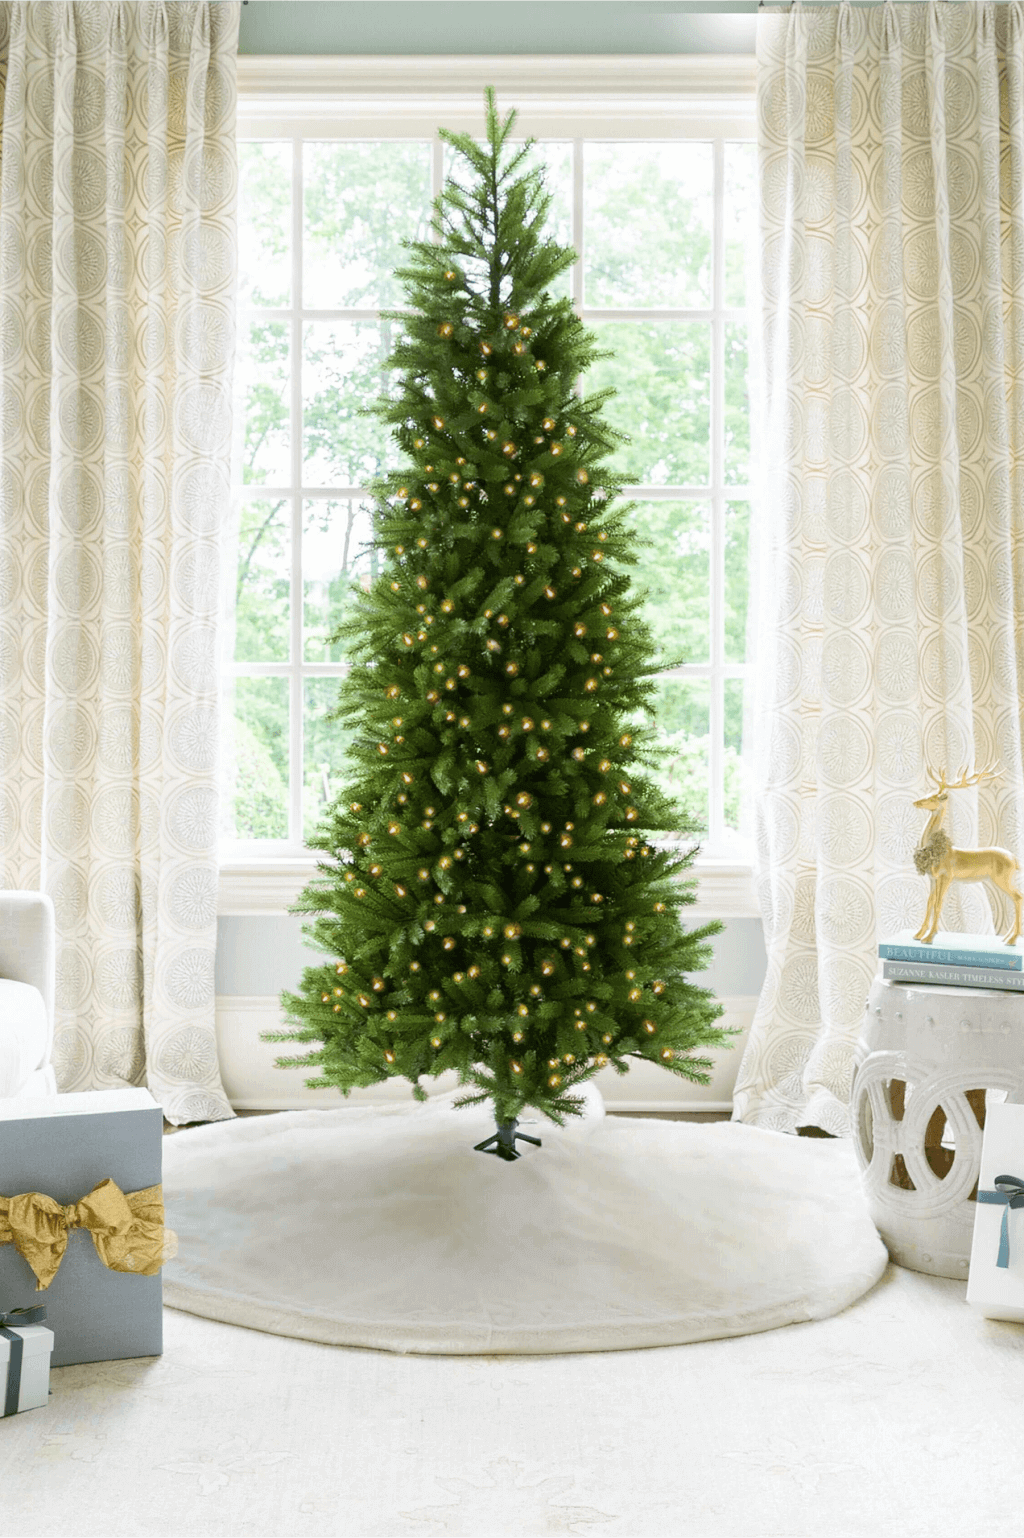 King of Christmas 6.5' King Fraser Fir Slim Quick-Shape Artificial Christmas Tree with 600 Dual Color Warm White & Multi-Color LED Lights